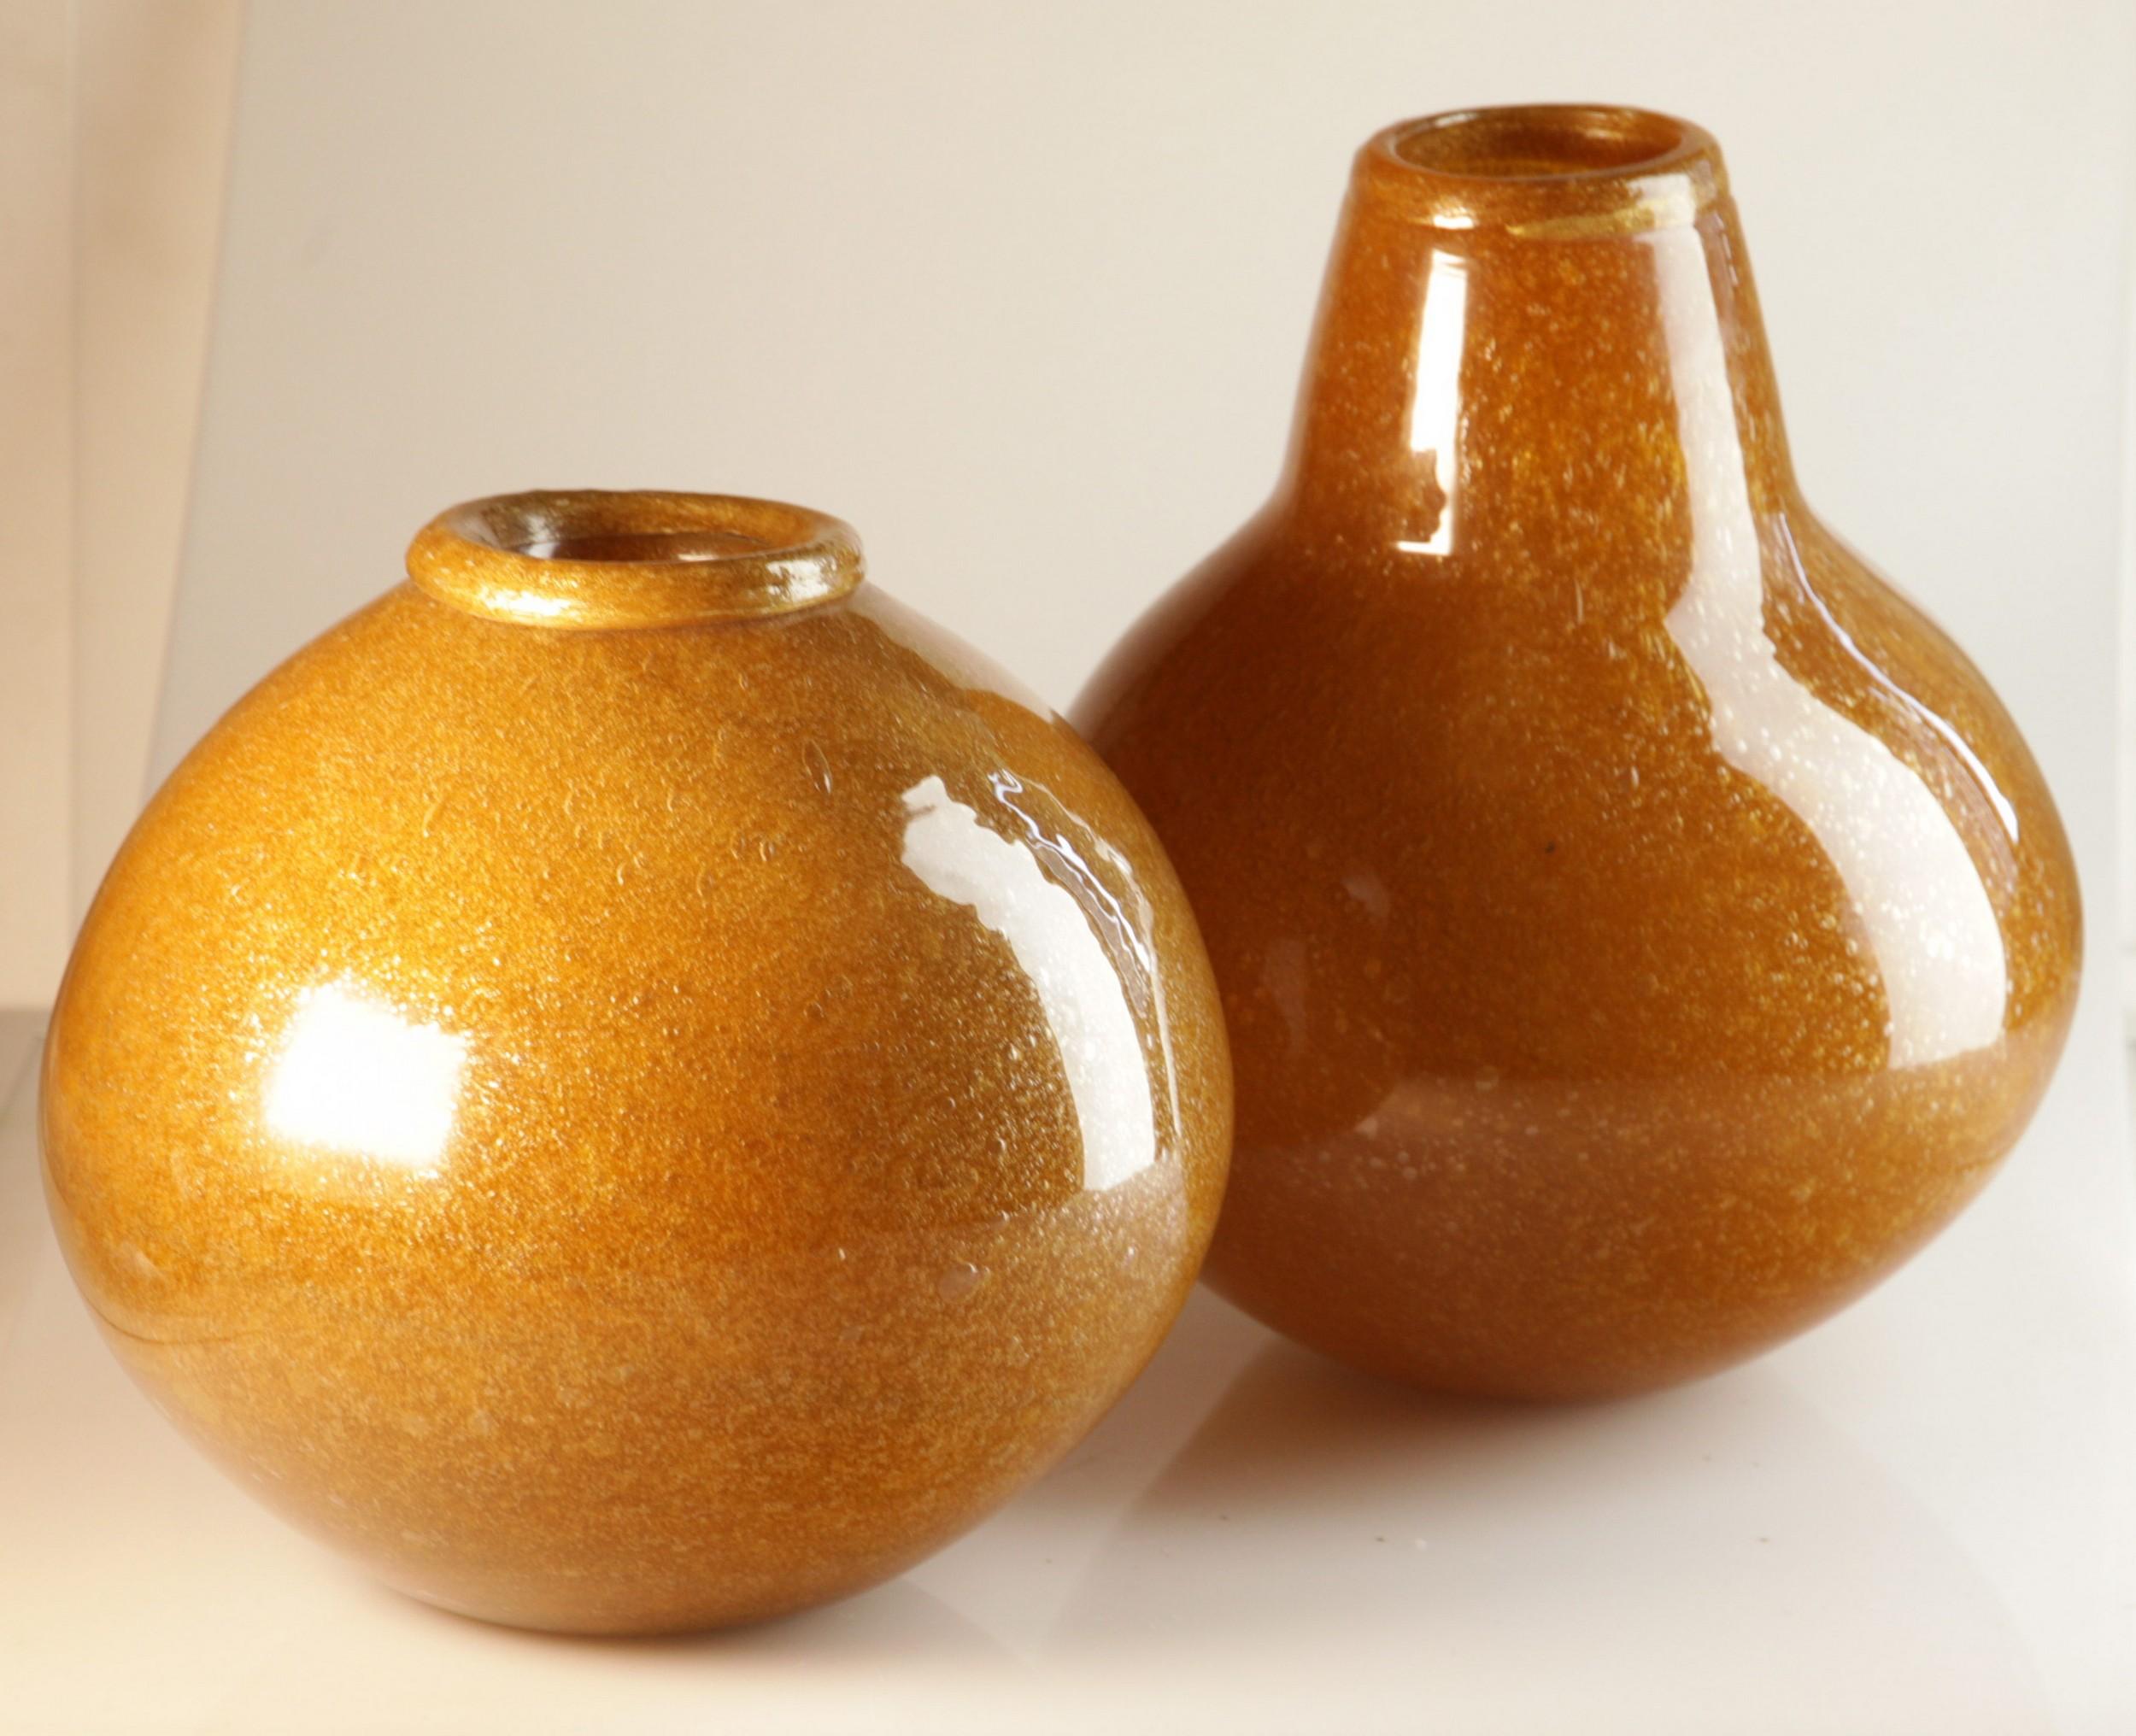 Set of two splendid Pulegoso vase. One round and the other tall. The round is lighter and the tall darker tone of mustard.
Perfectly executed Pulegoso finish. This is Murano Crucible Pulegoso. The mouth has a rim with external gold leaf difficult